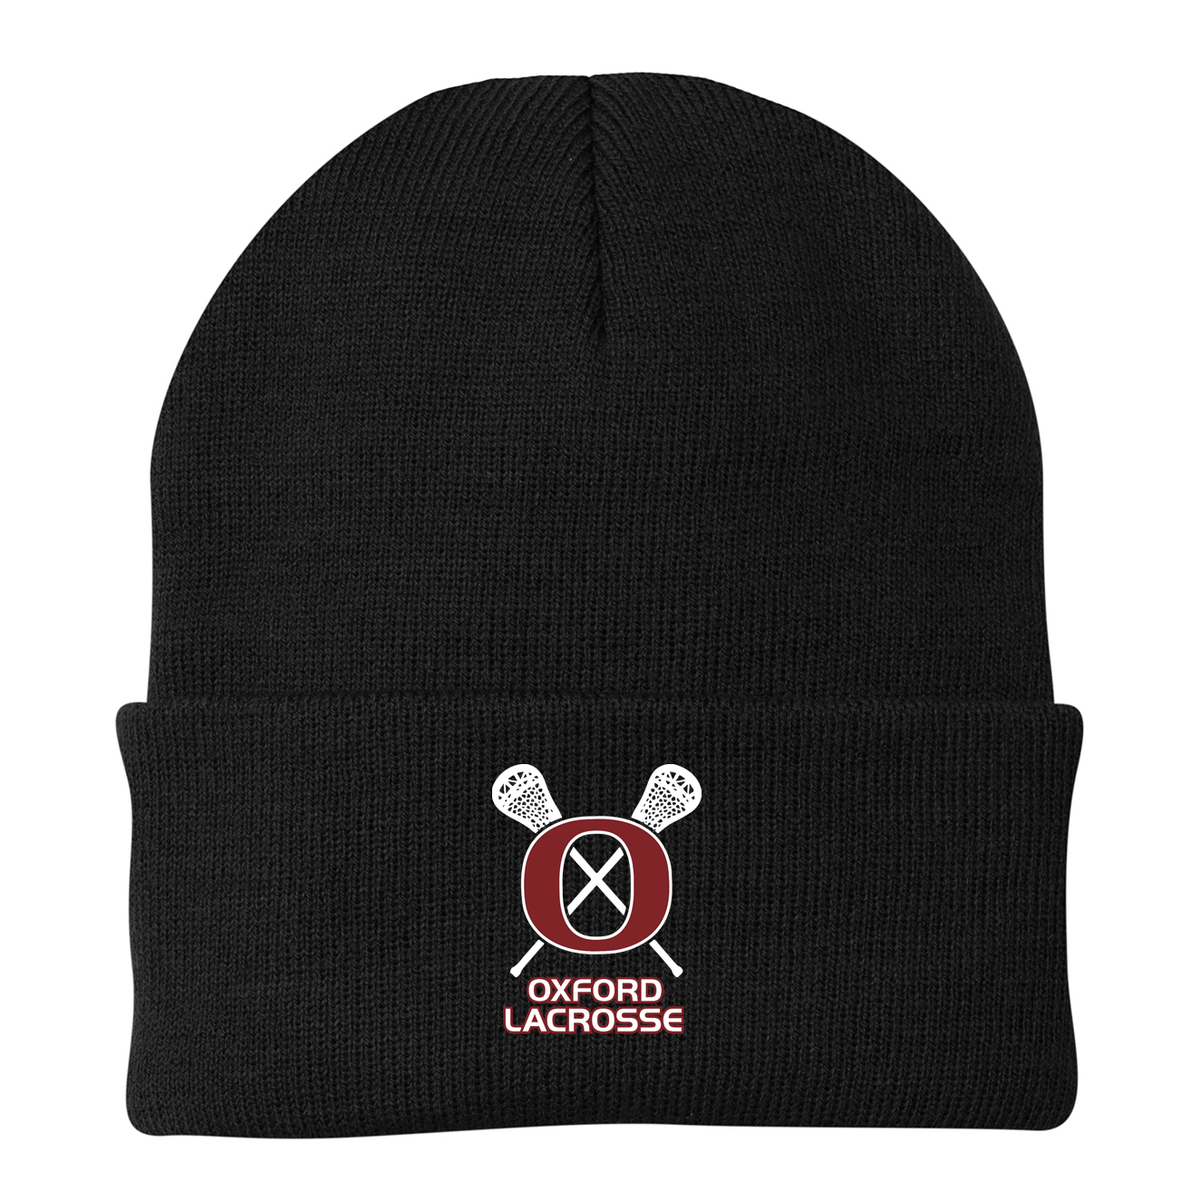 Oxford Youth Lacrosse Knit Beanie